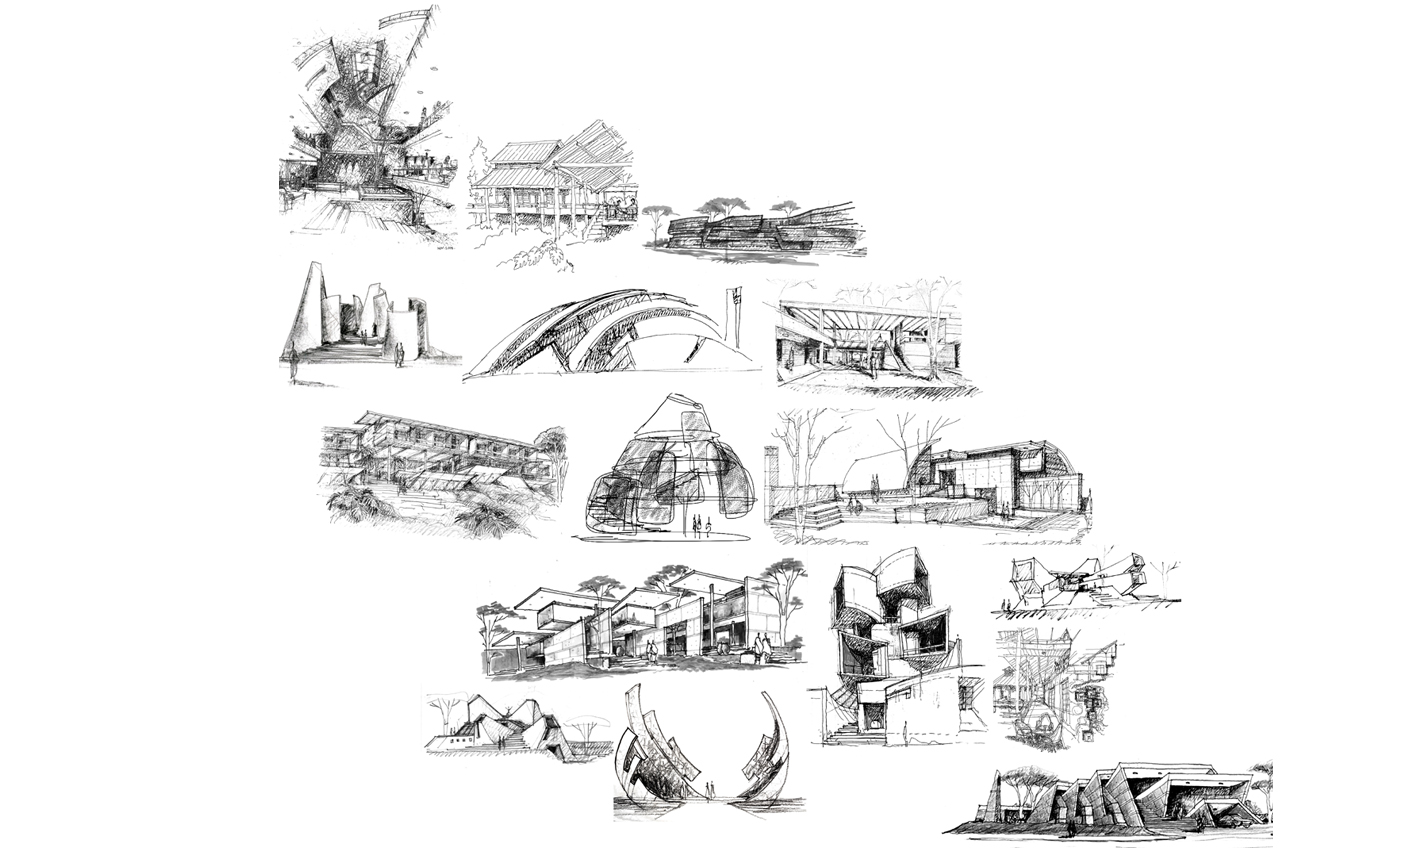 How to Sketch Like An Architect  Architects Sketches  ArSanjay Mohe   Connecting the Dots Book  YouTube